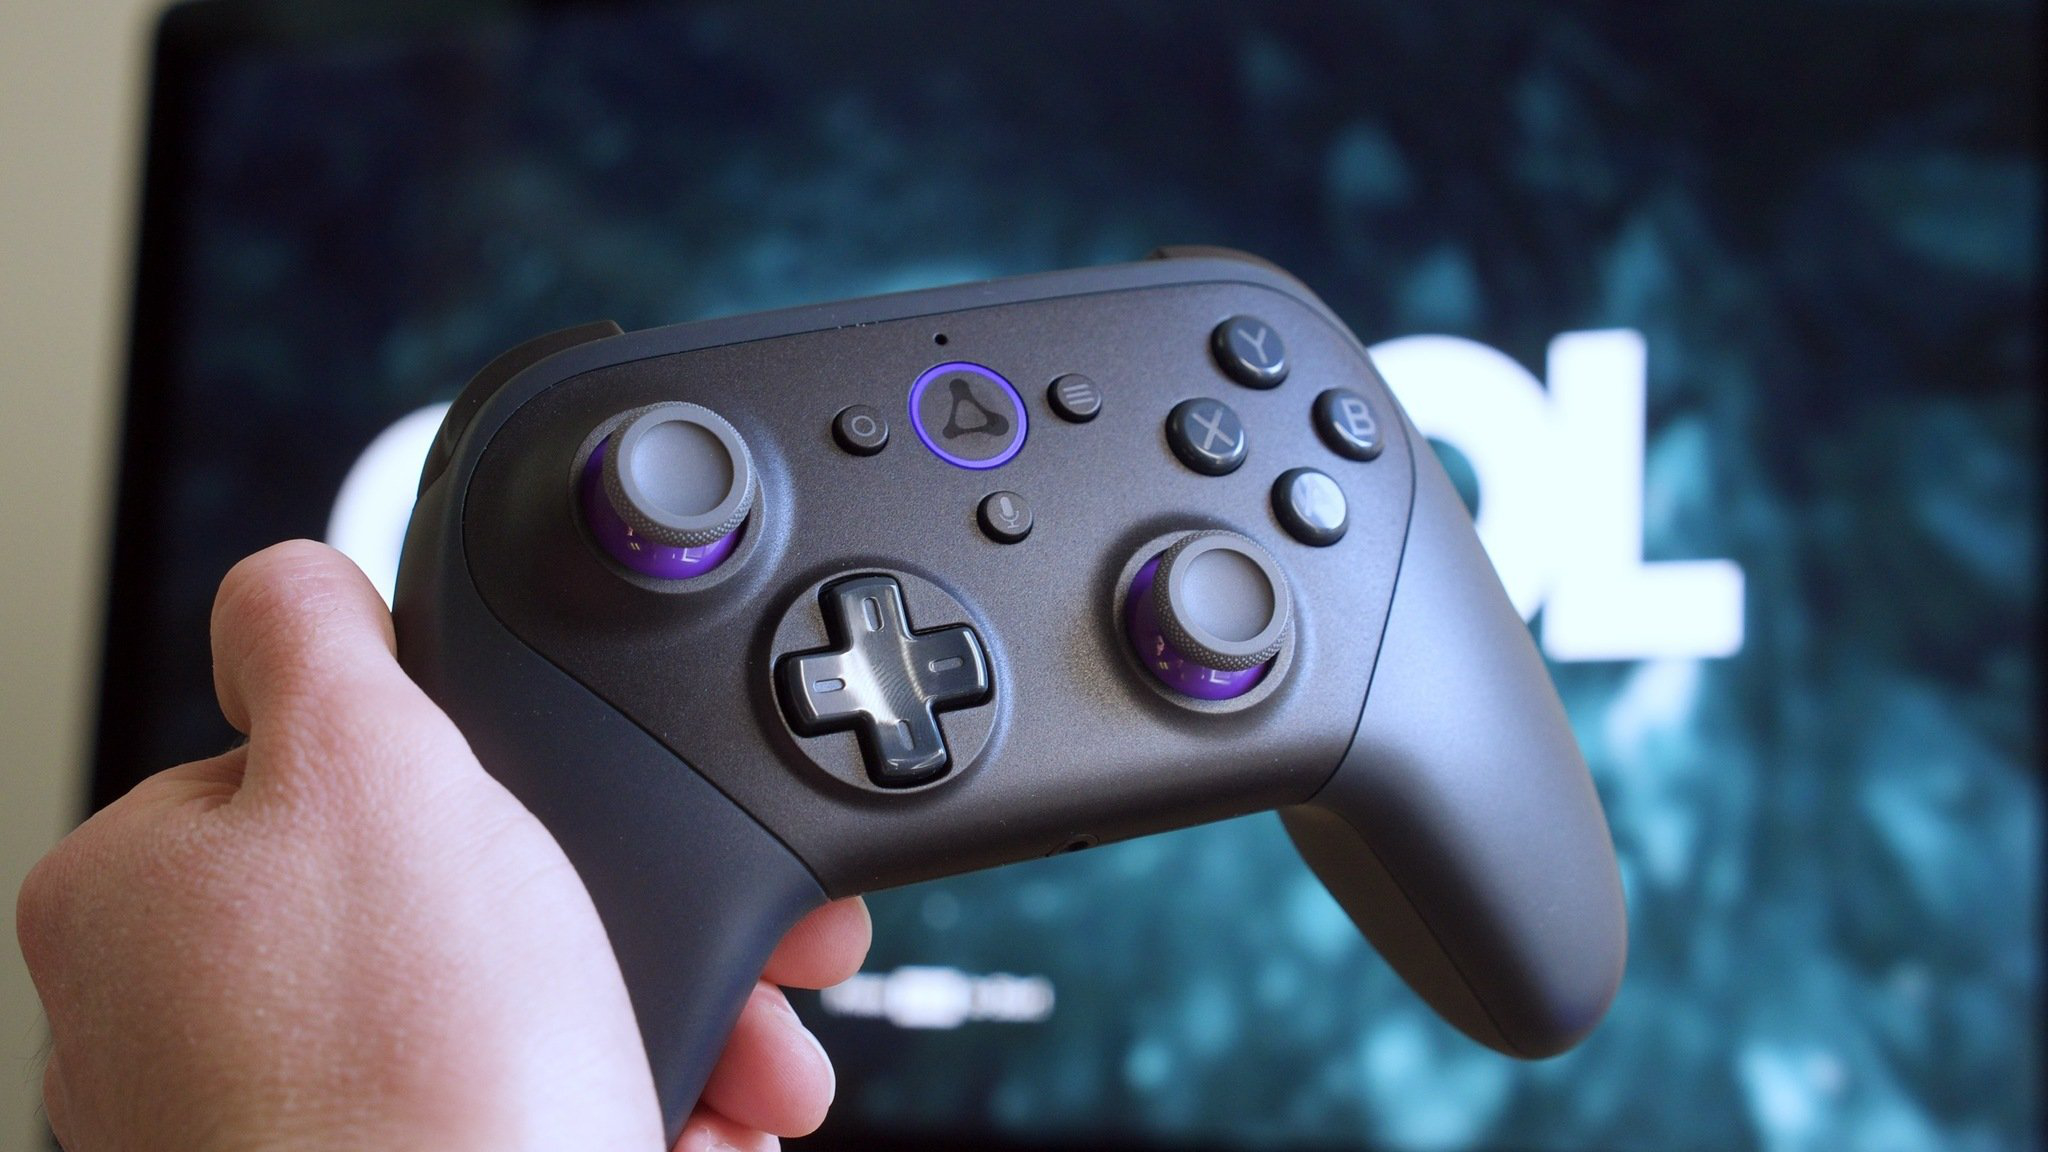 Luna Controller hands-on: Console gaming almost anywhere - CNET